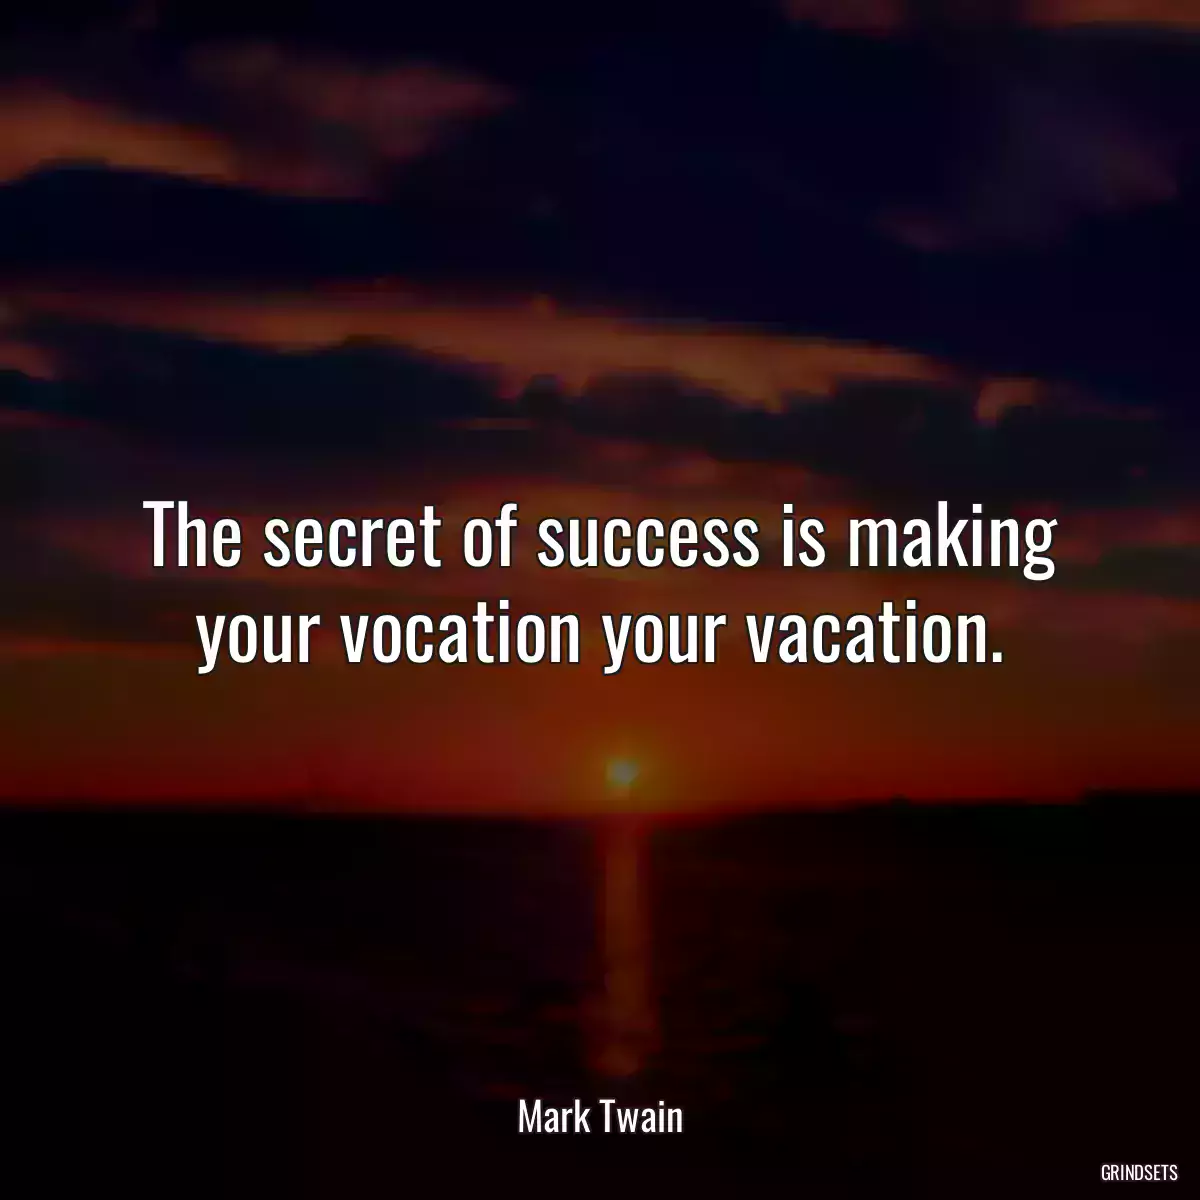 The secret of success is making your vocation your vacation.